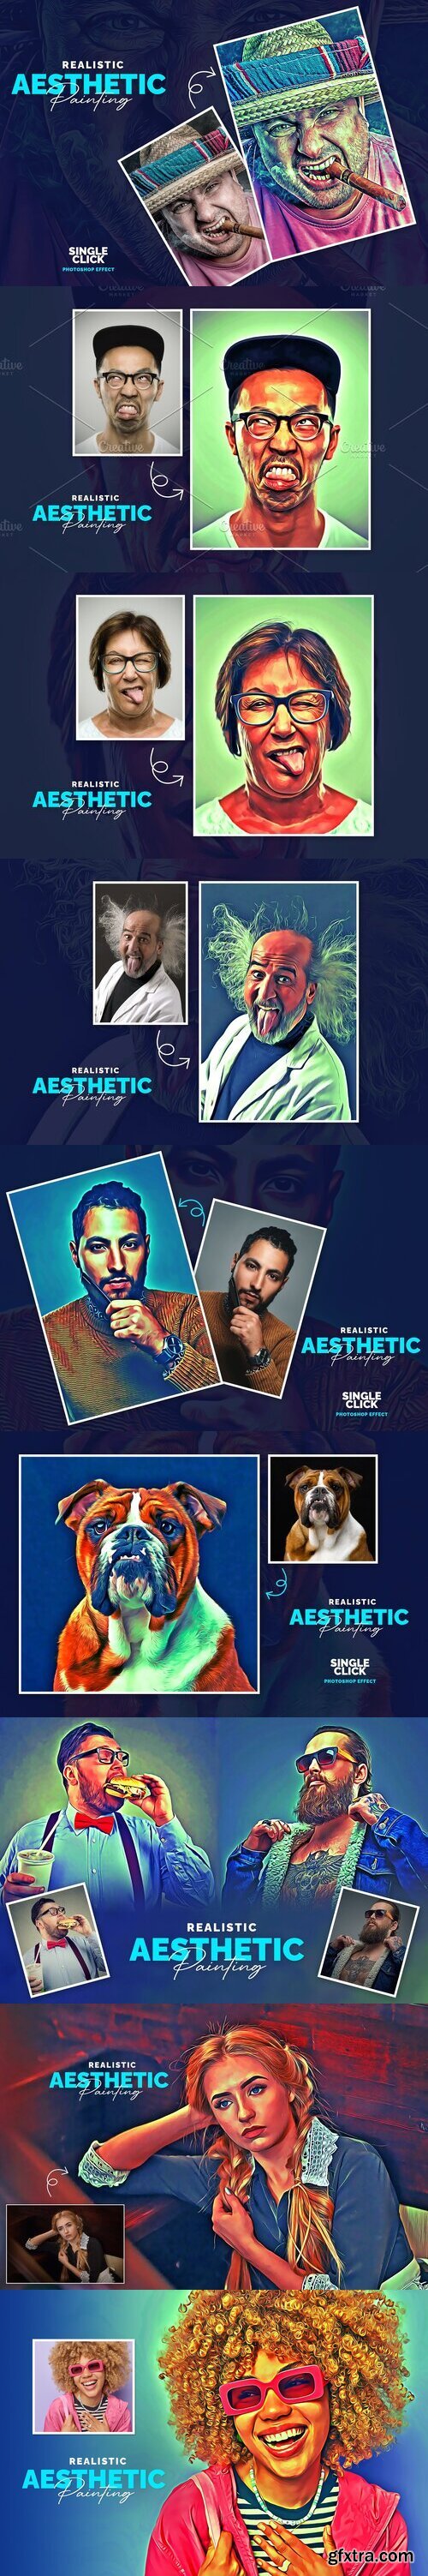 CreativeMarket - Realistic Asthetic Painting 7821844